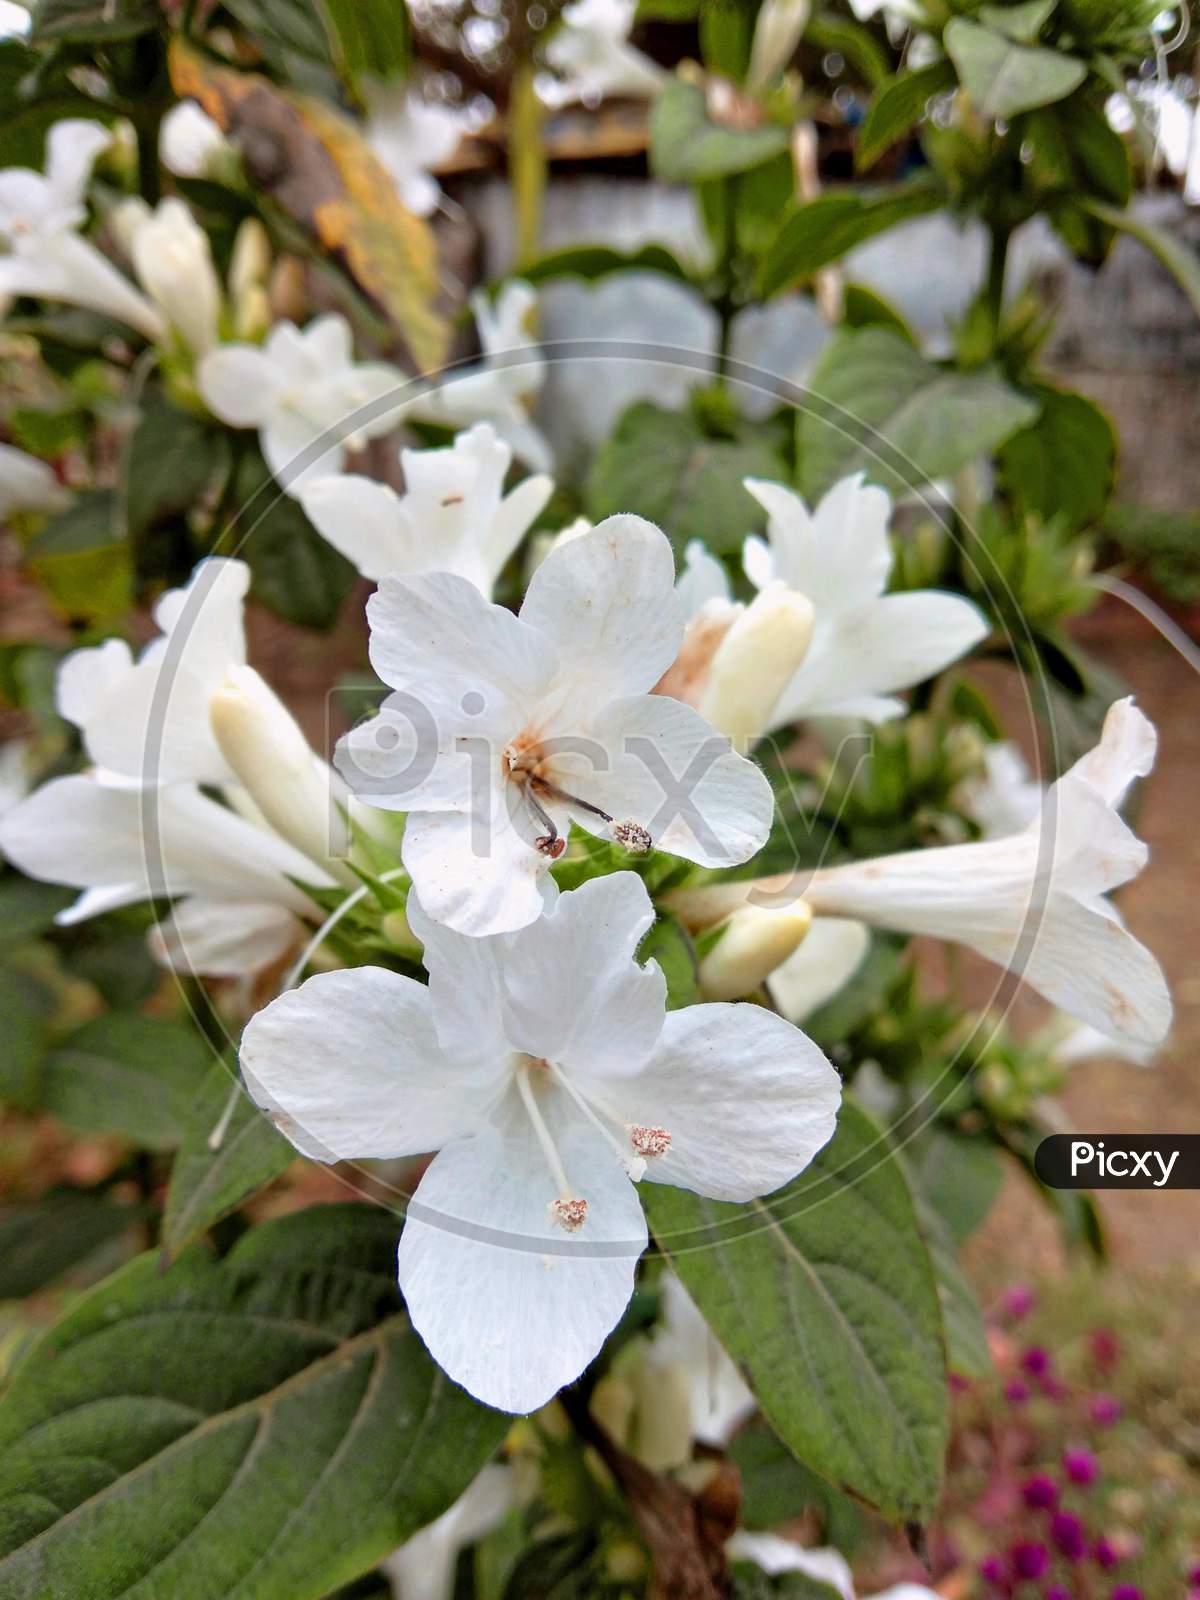 Beautiful White Flowers With Green Leaves